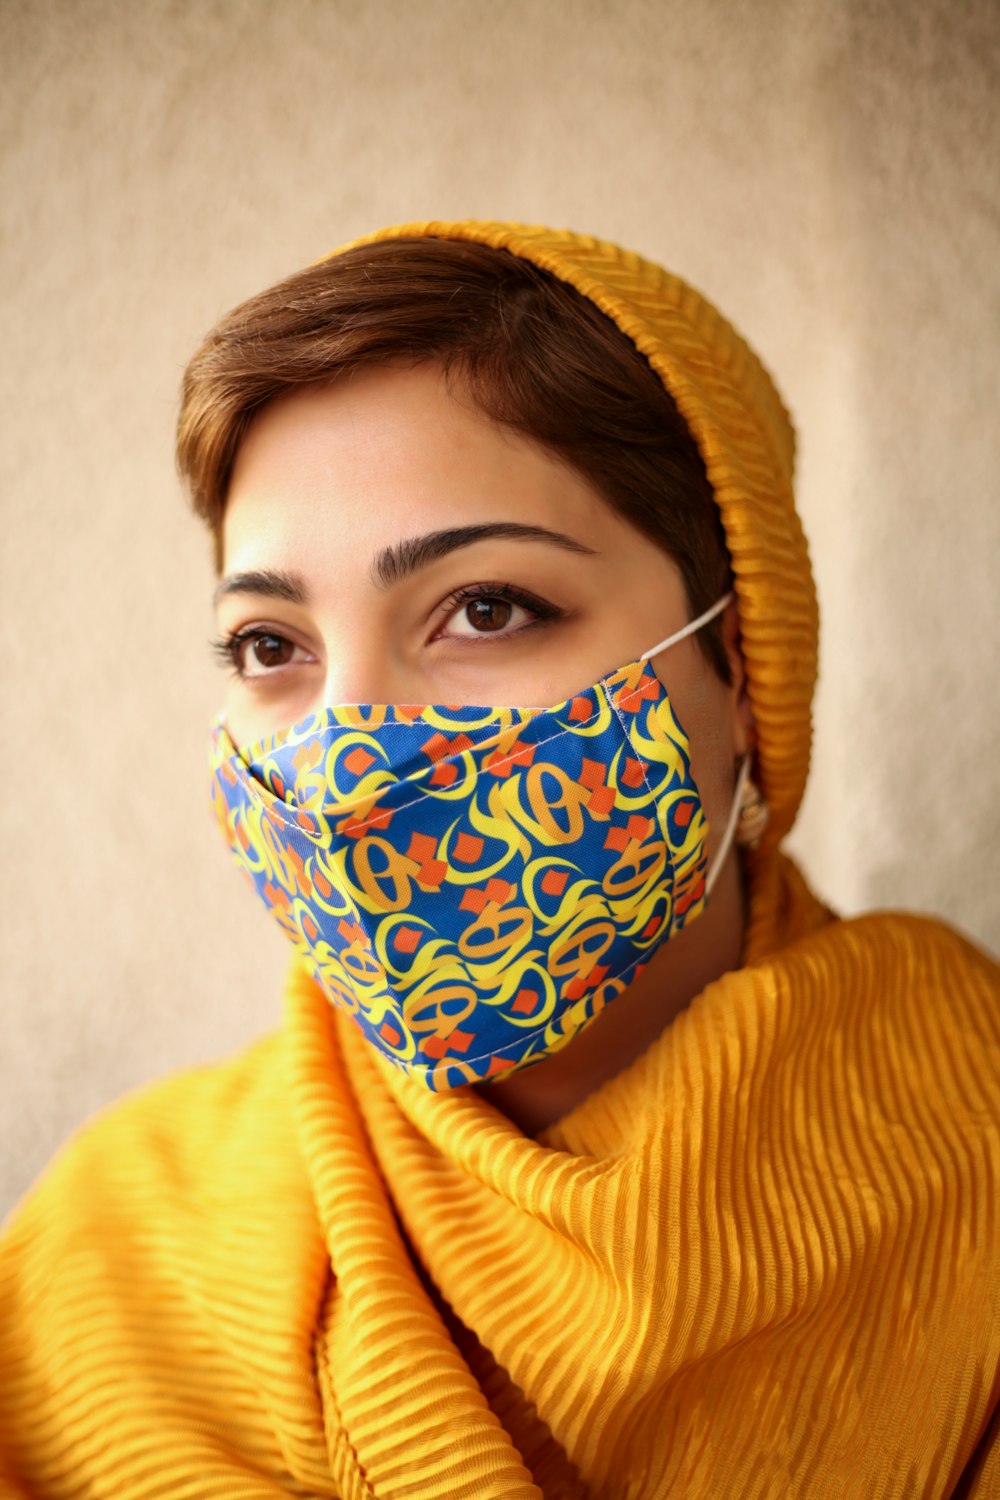 woman in yellow knit sweater wearing blue and white mask